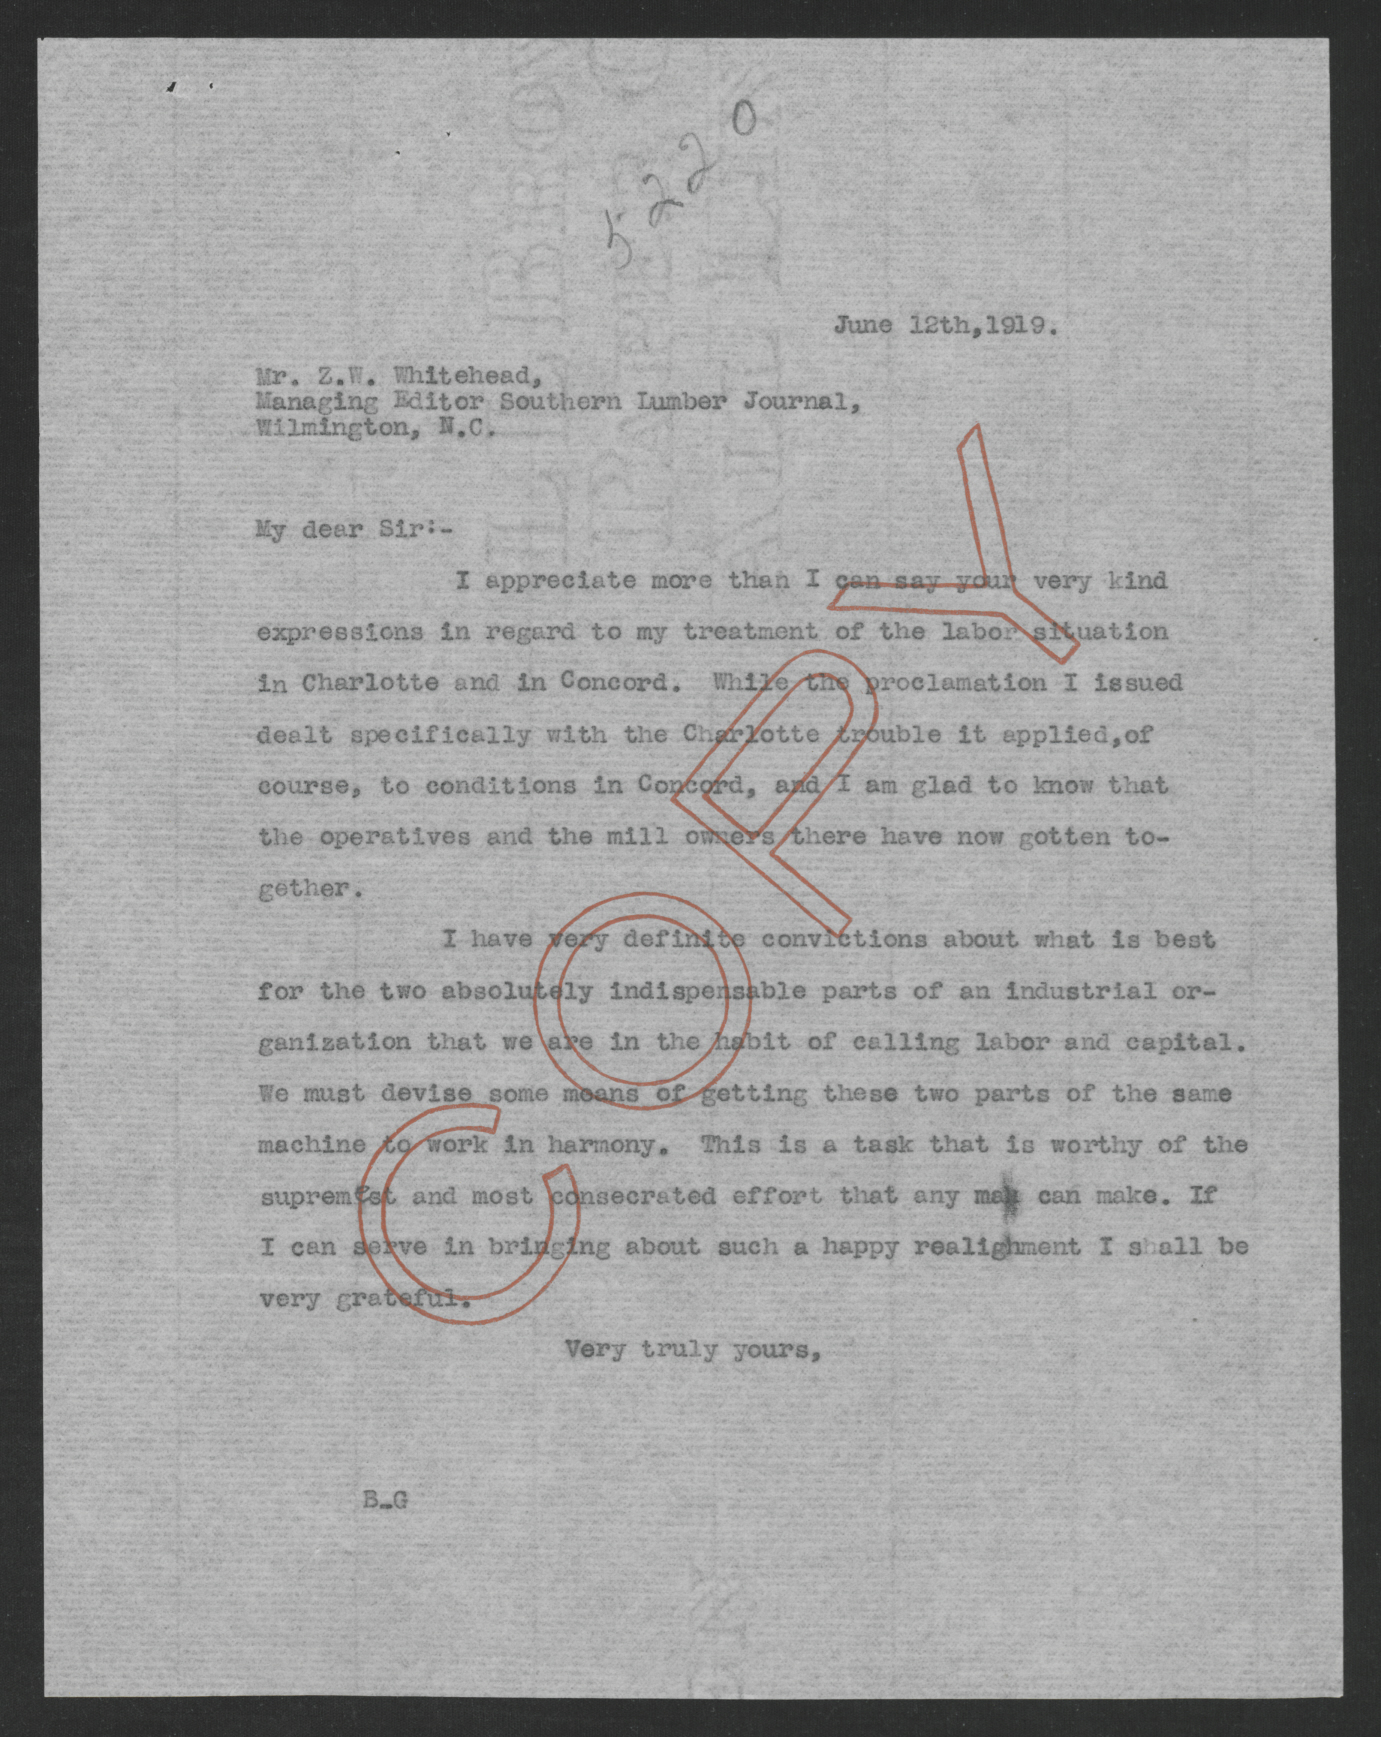 Letter from Thomas W. Bickett to Zollicoffer W. Whitehead, June 12, 1919